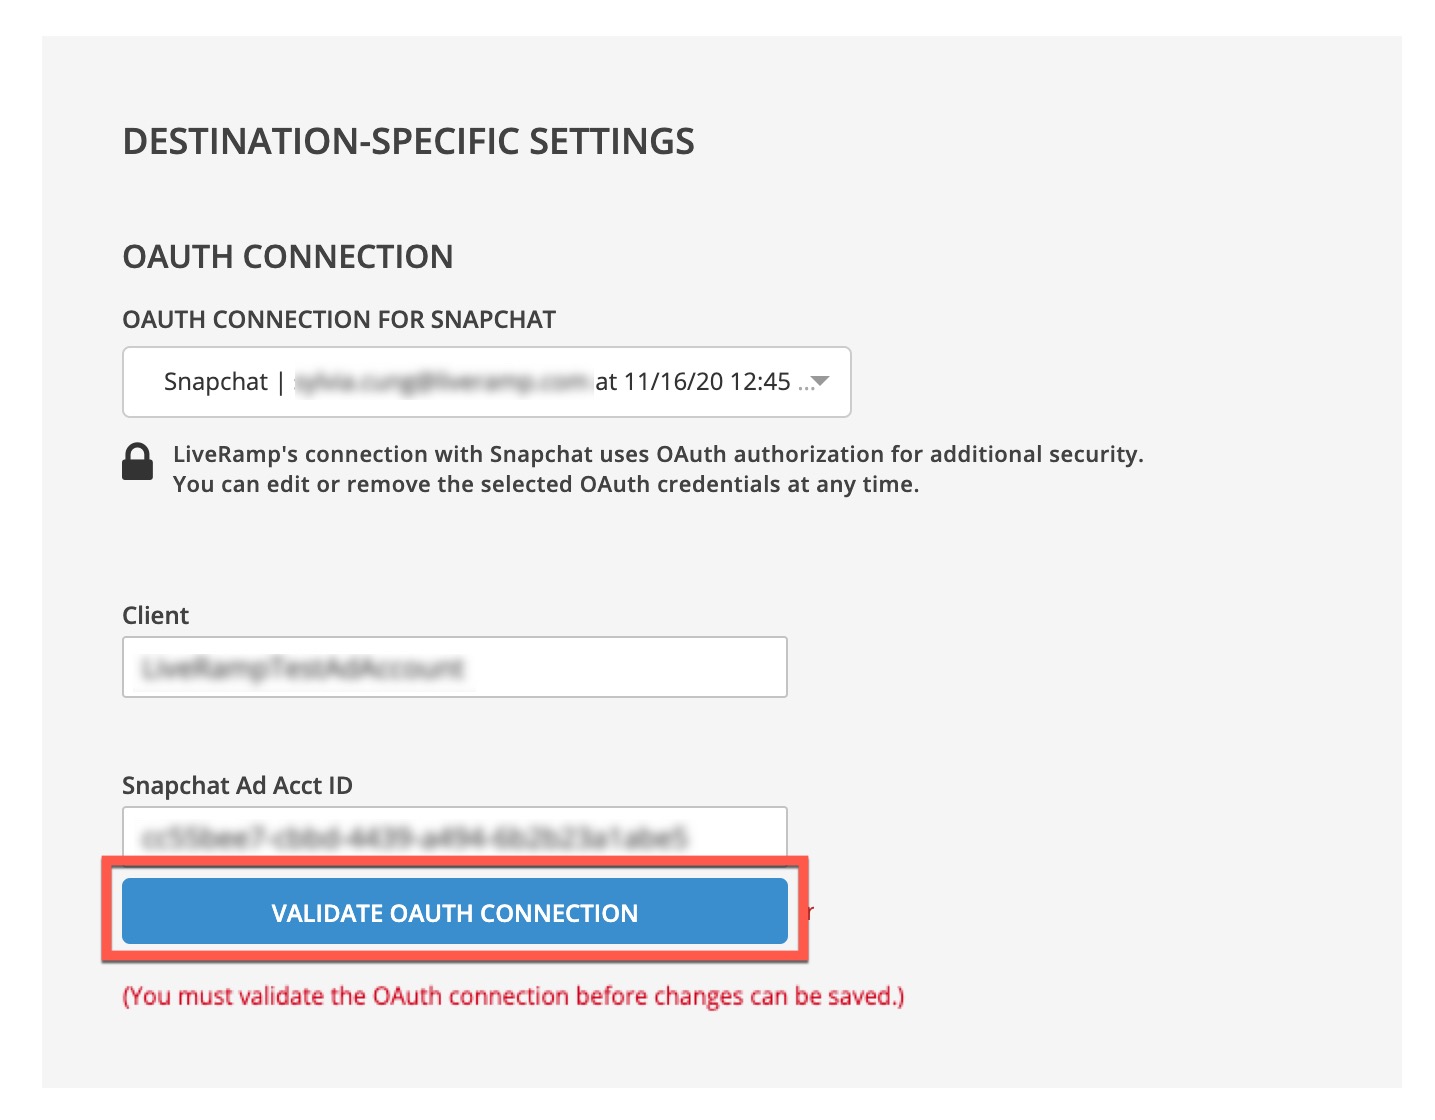 C-Activate_New_Destination_Account-Validate_OAuth_Connection_button.jpg